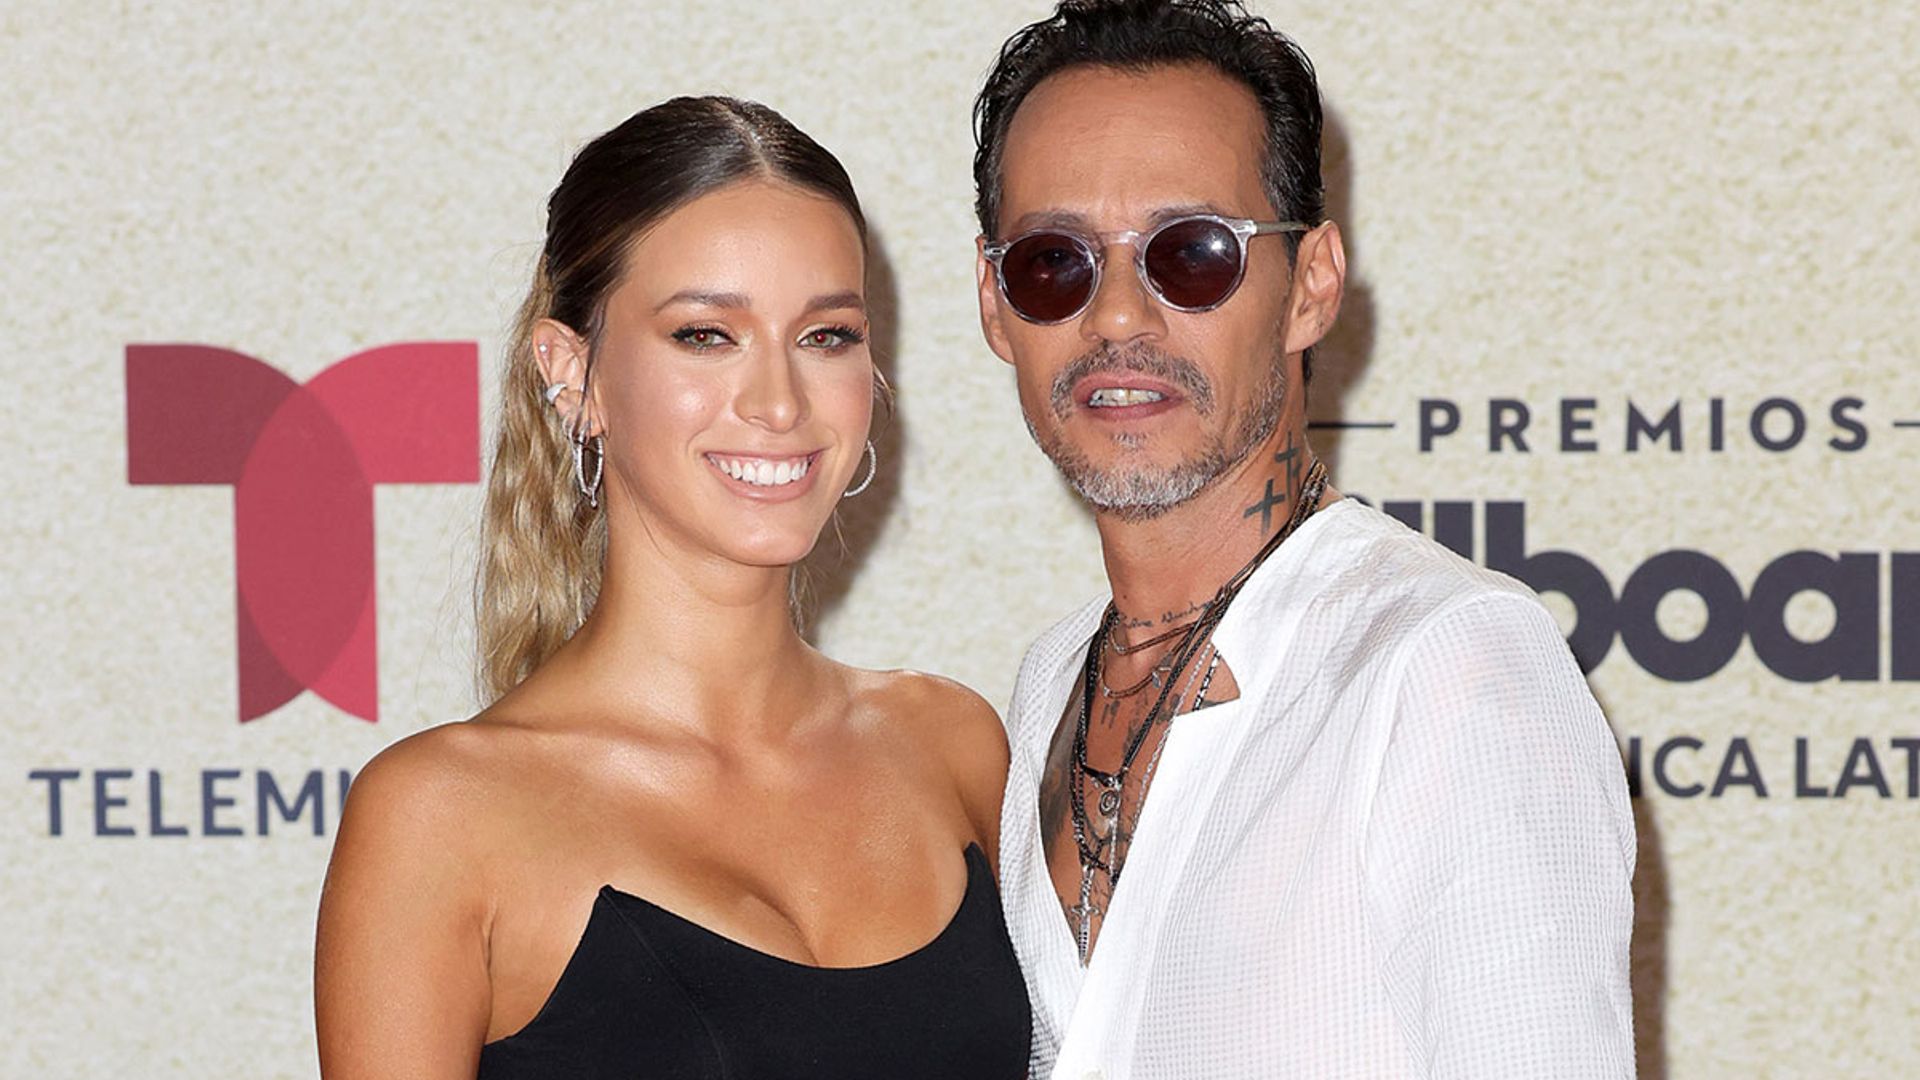 Marc Anthony shares a kiss with new girlfriend as he debuts surprise romance